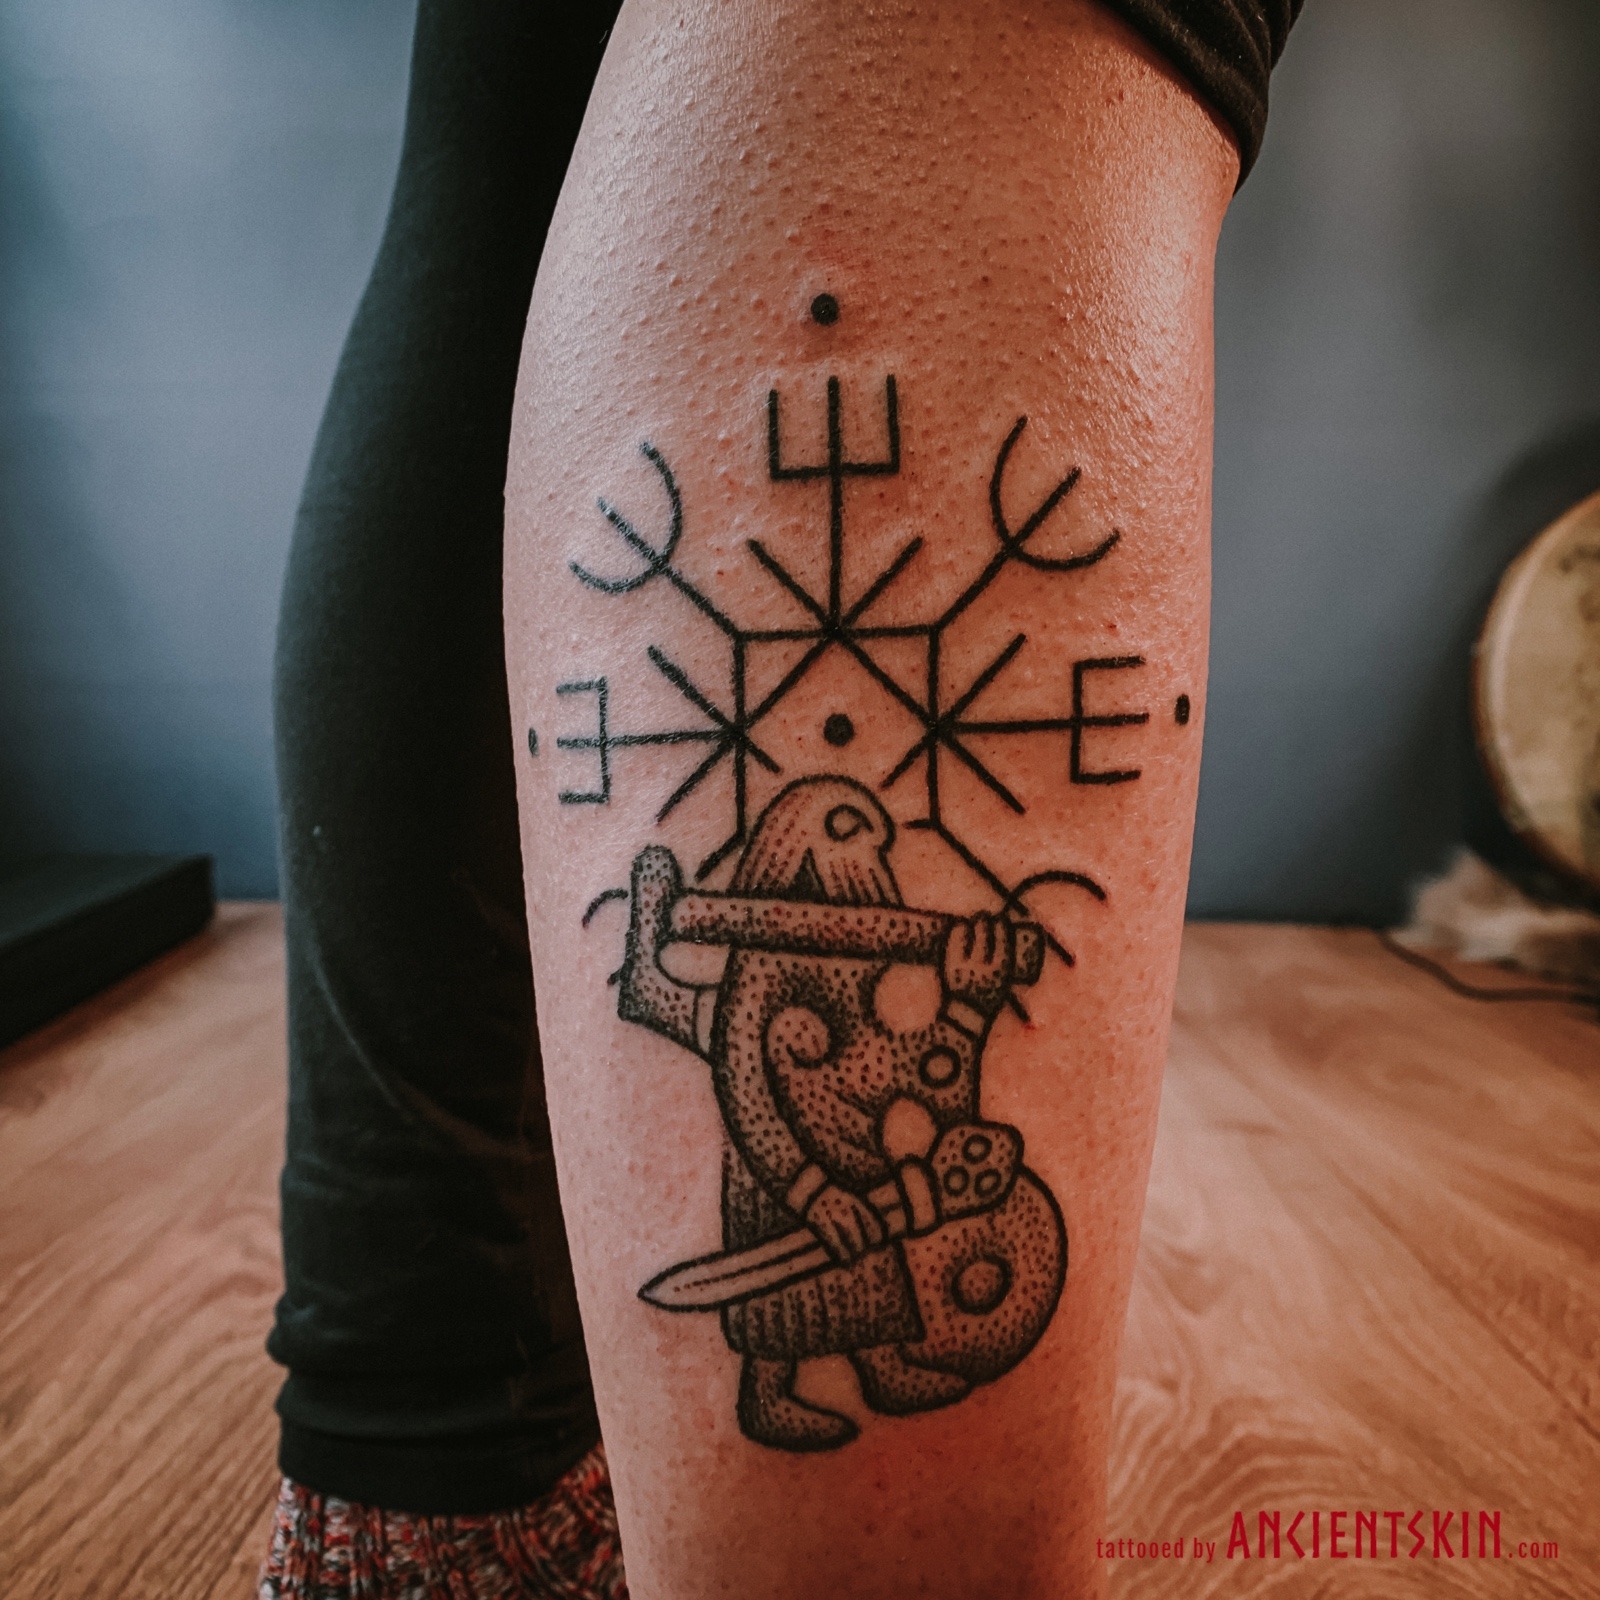 10 Best Viking Chest Tattoo Ideas That Will Blow Your Mind!